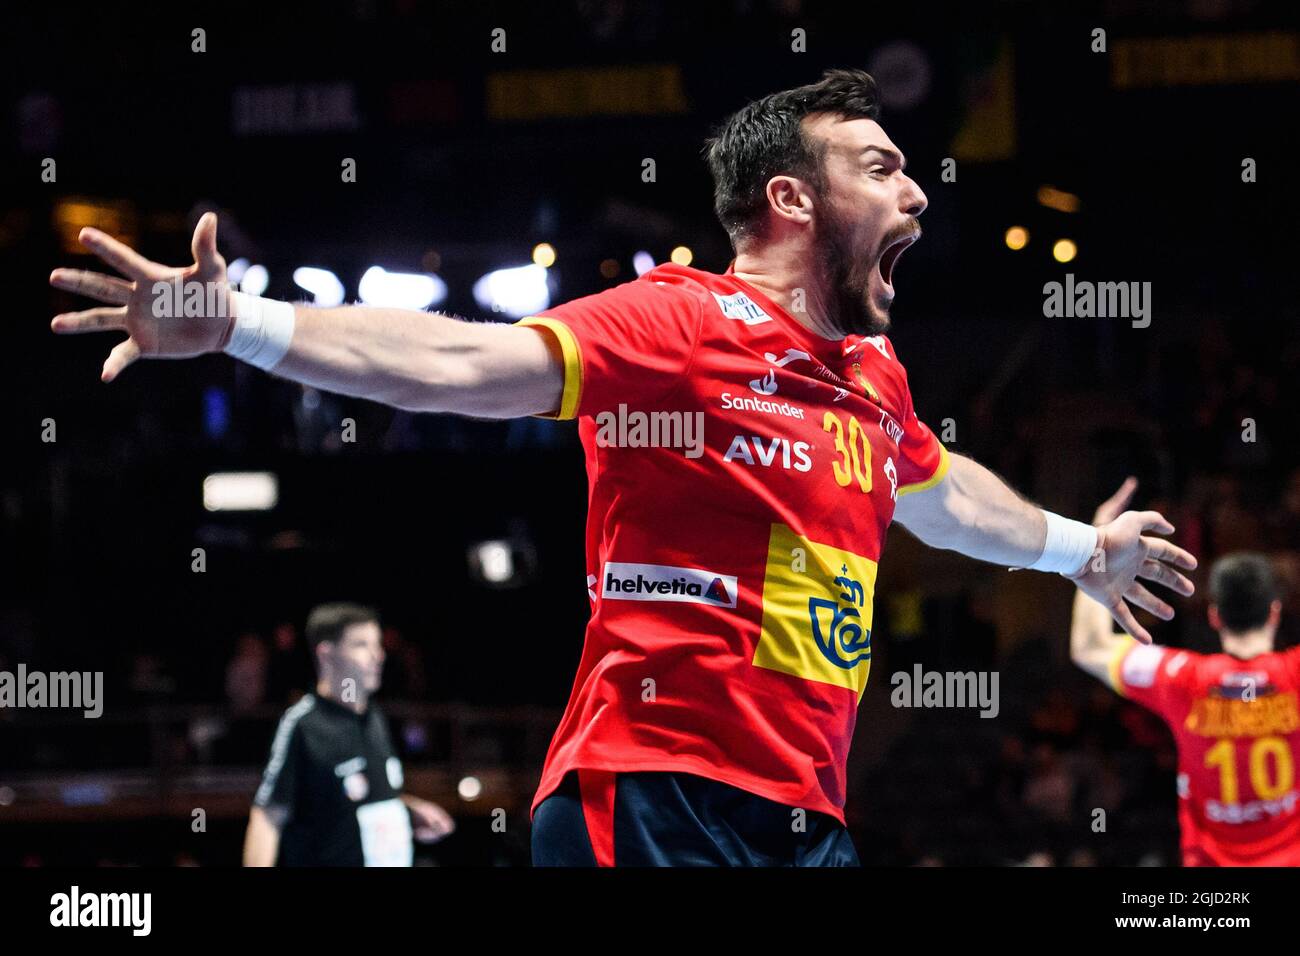 Spain's Gedeon Guardiola celebrates after wnning the semi final match Spain and Slovenia during the Men's European Handball Championship in Stockholm, Sweden, on Jan. 24, 2020. Photo: Erik Simander / TT code 11720  Stock Photo